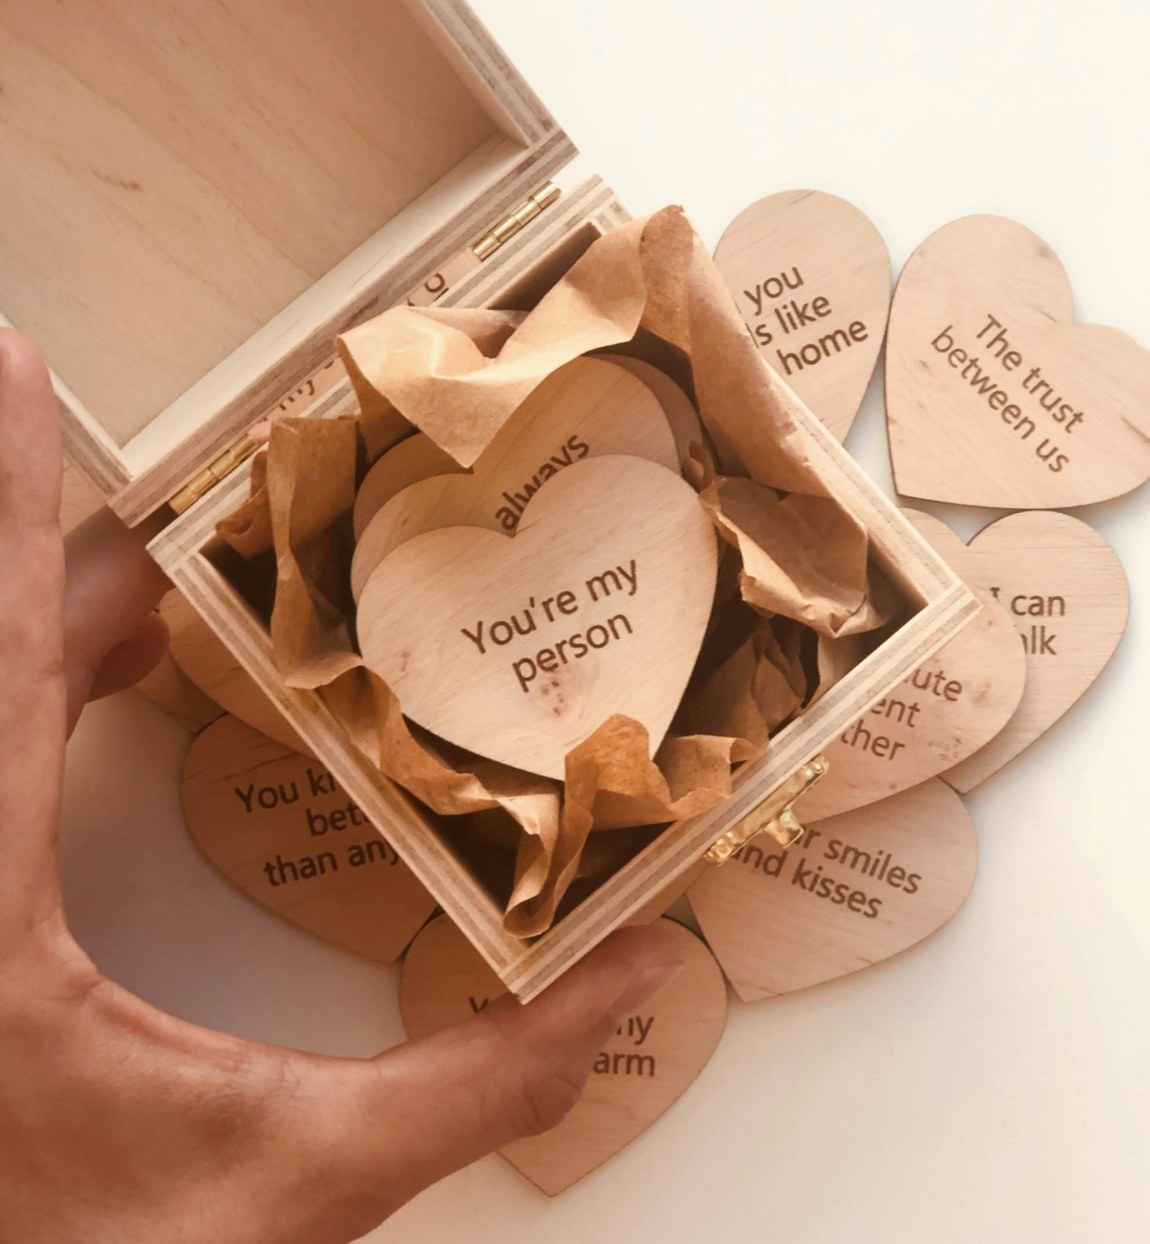 The gift box with heart-shaped wood pieces inside